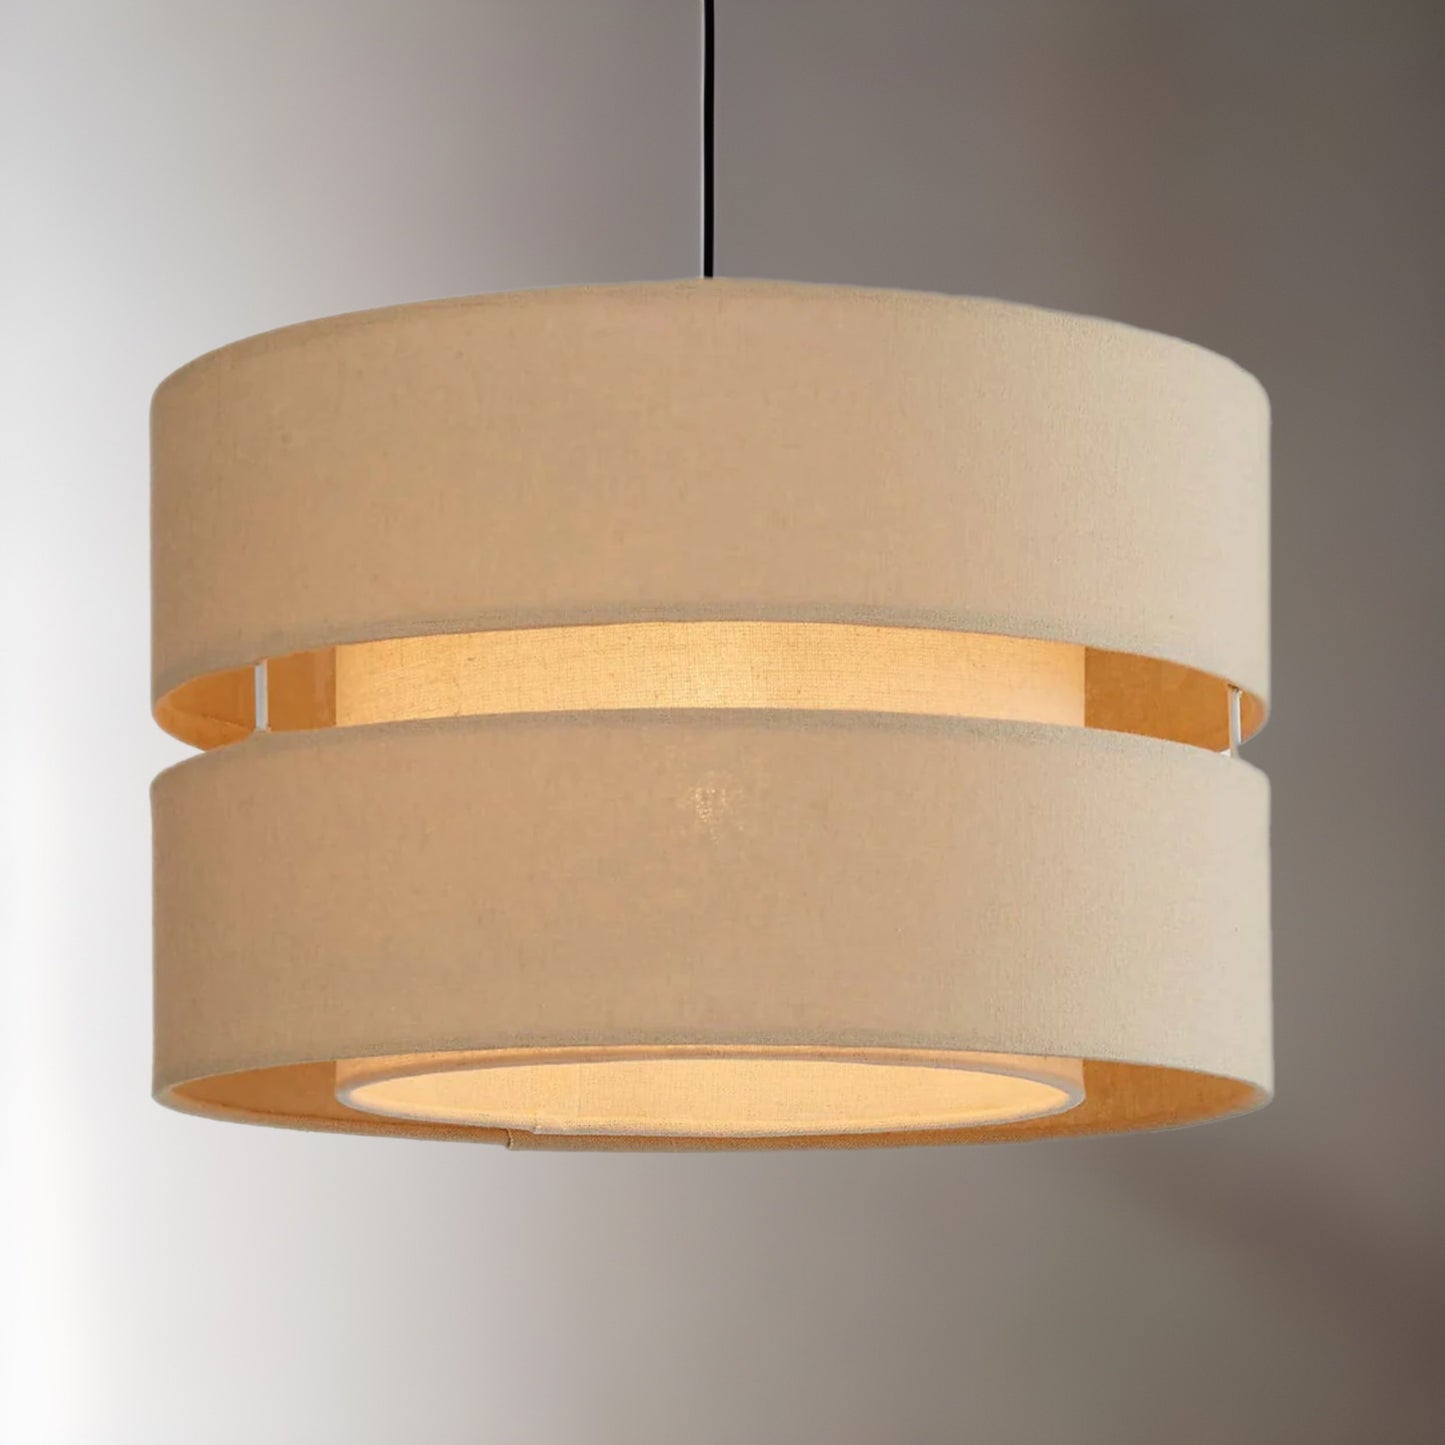 Our Gayle easy fit two tiered luxury fabric double layered shade is contemporary in its appearance and we have designed the shade to suit a range of interiors. Easy to fit simply attached to an existing pendant flitting.  It is crafted from high quality fabric material in two layers and complimented with a matching inner which looks beautiful when light shines through. The shade has been made to fit both a ceiling light or lamp base.